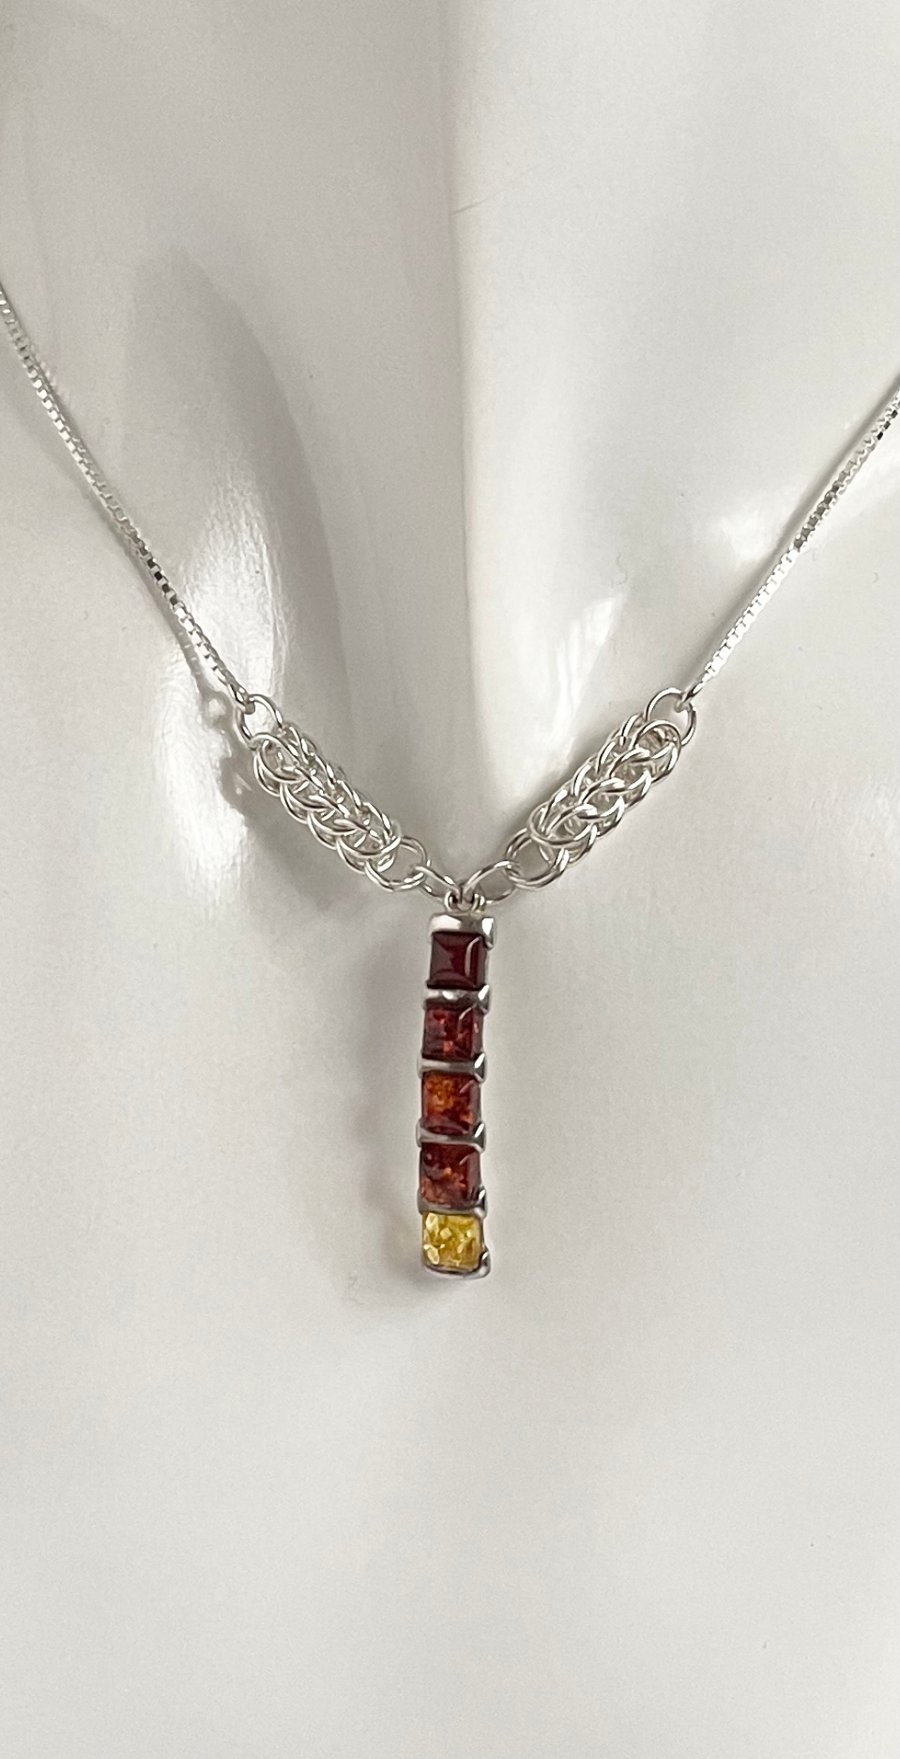 Amber Sterling Silver Chainmaille Necklace